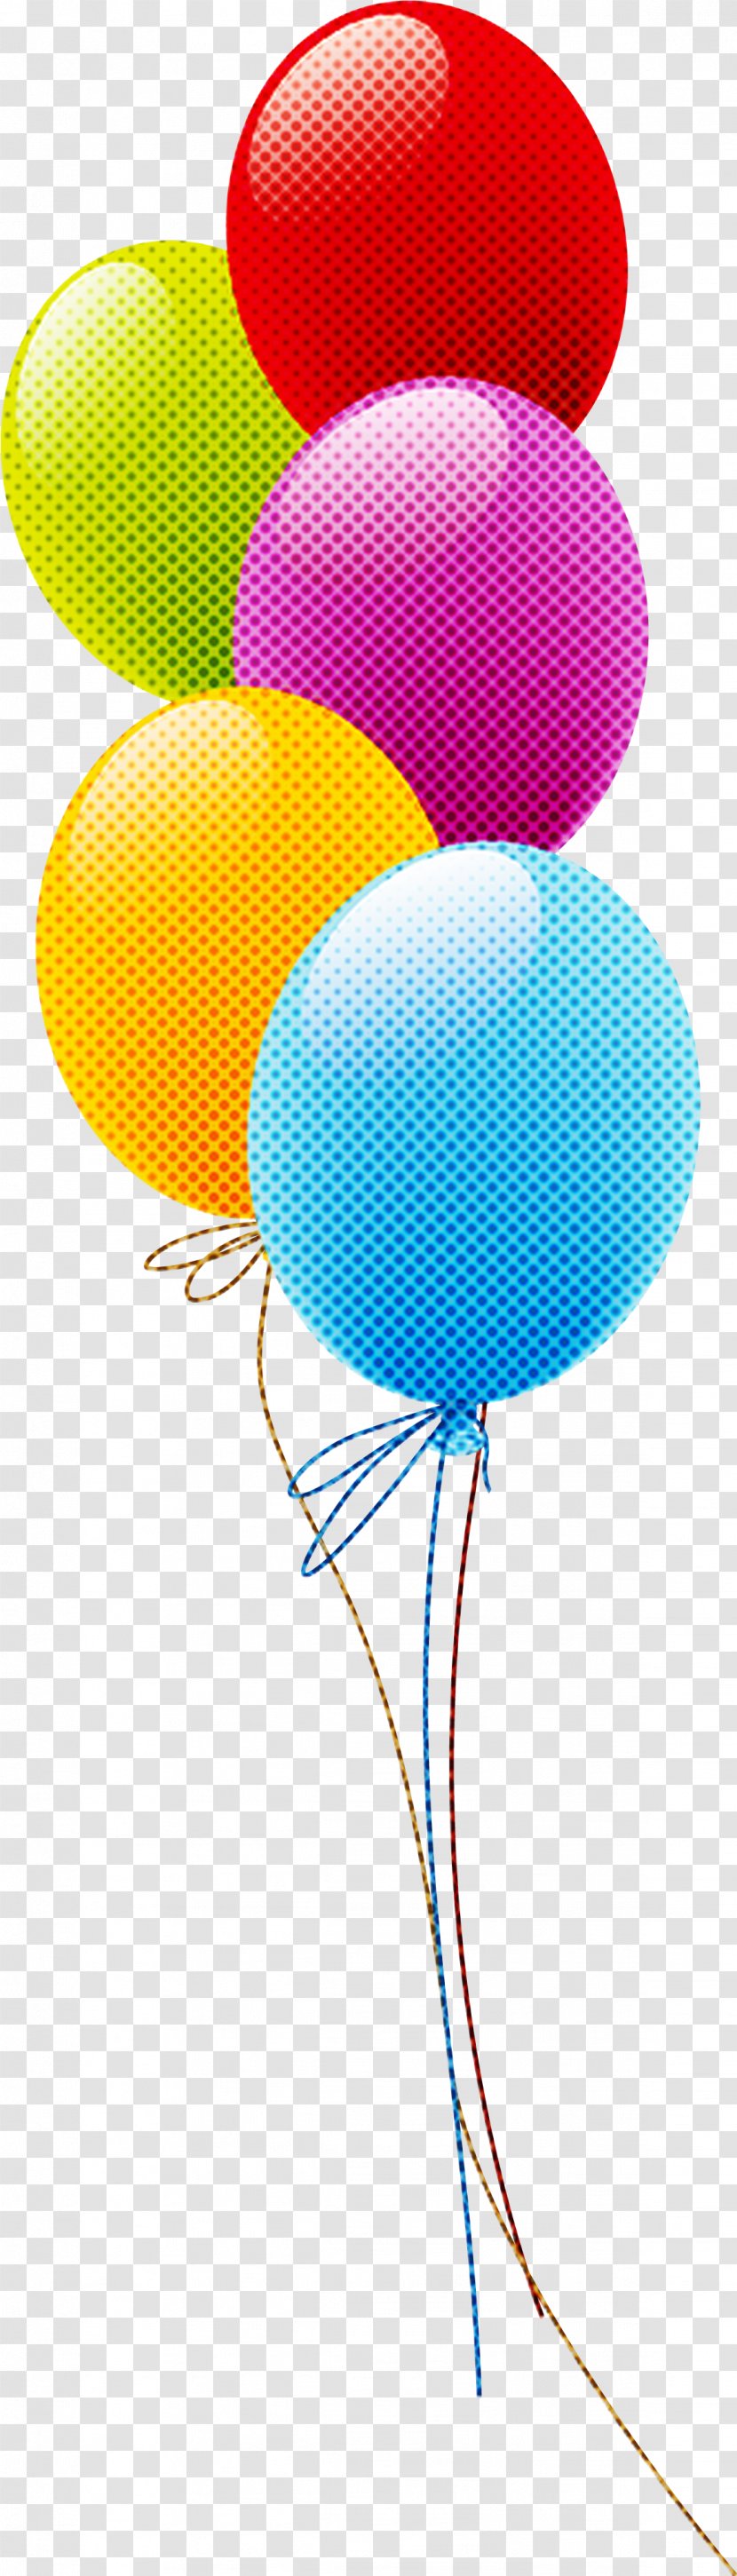 Balloon Turquoise Party Supply Pattern Transparent PNG